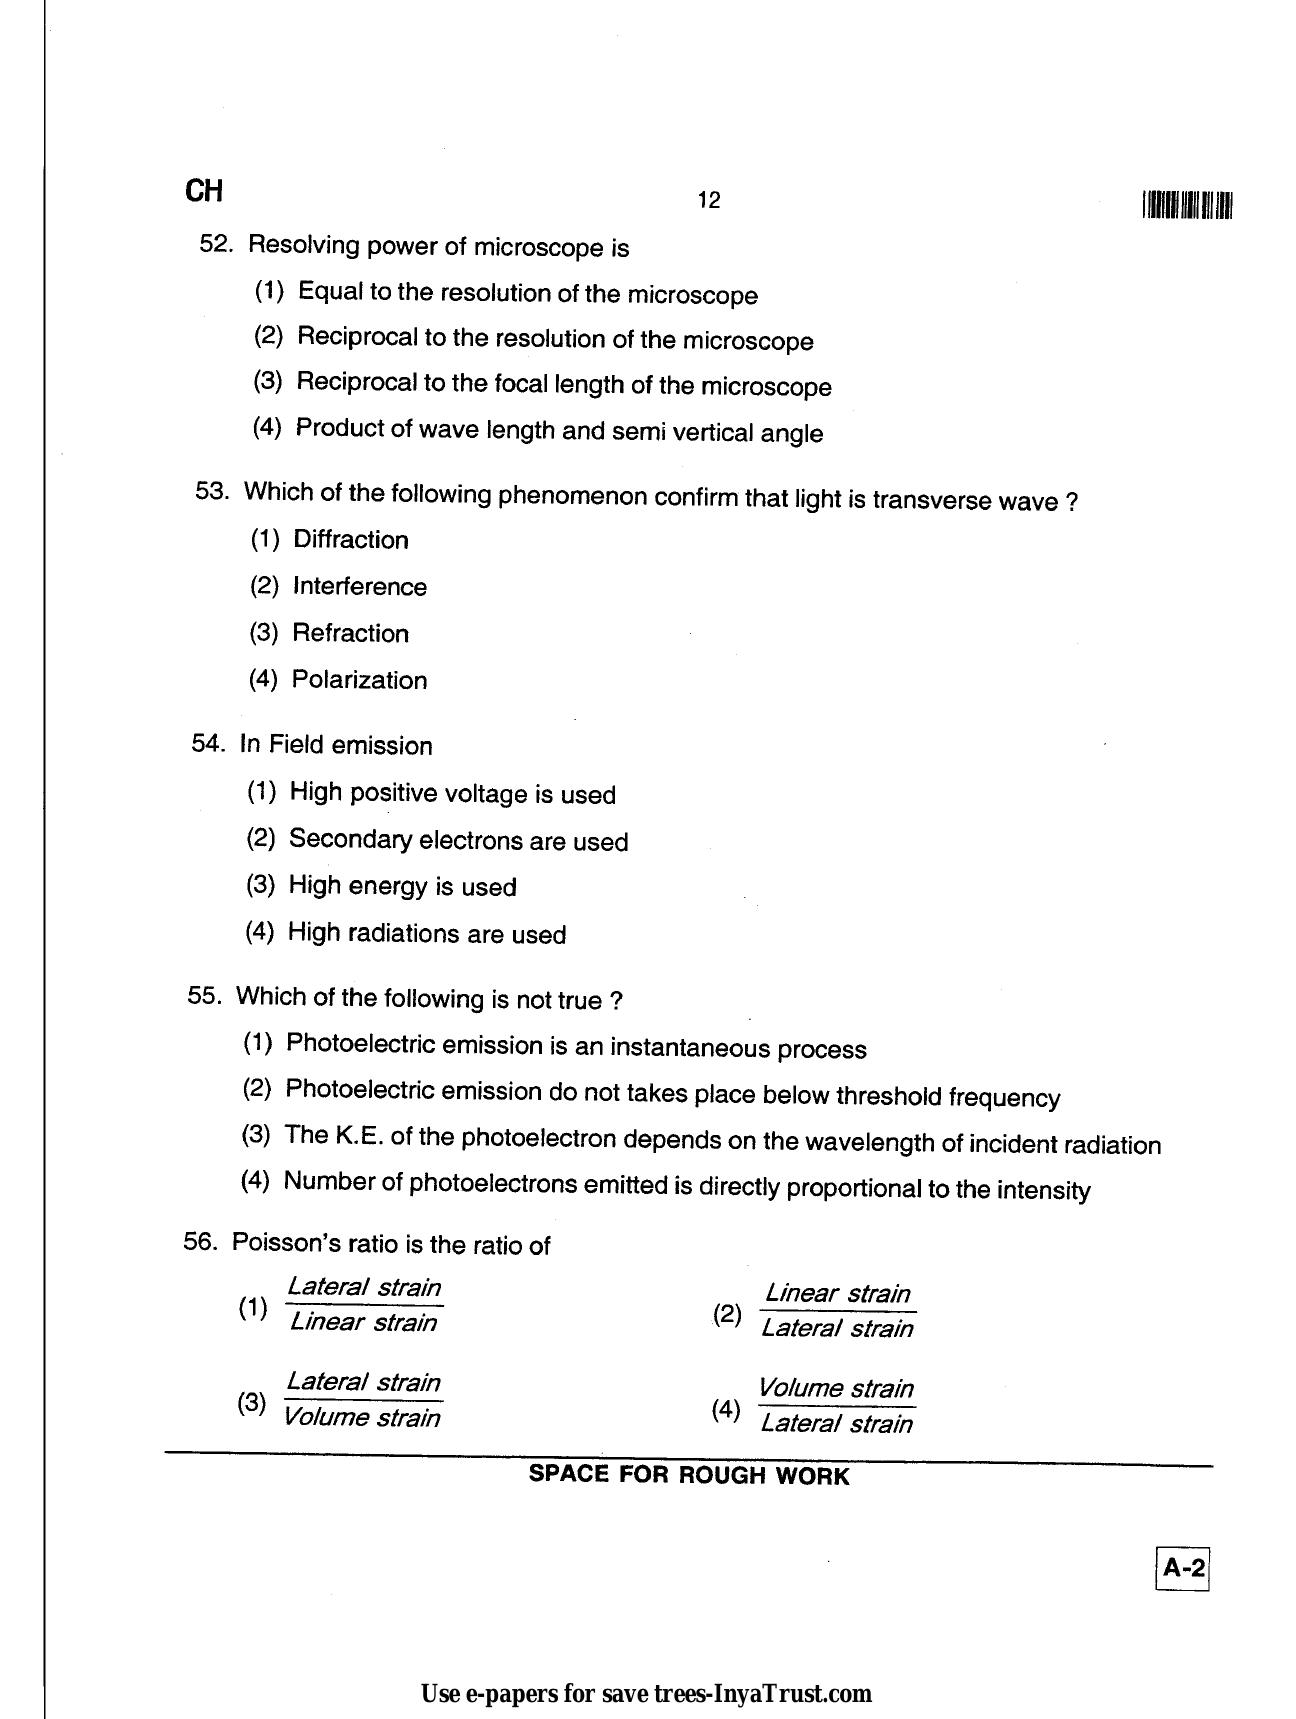 Karnataka Diploma CET- 2013 Chemical Engineering / Polymer Technology Question Paper - Page 12